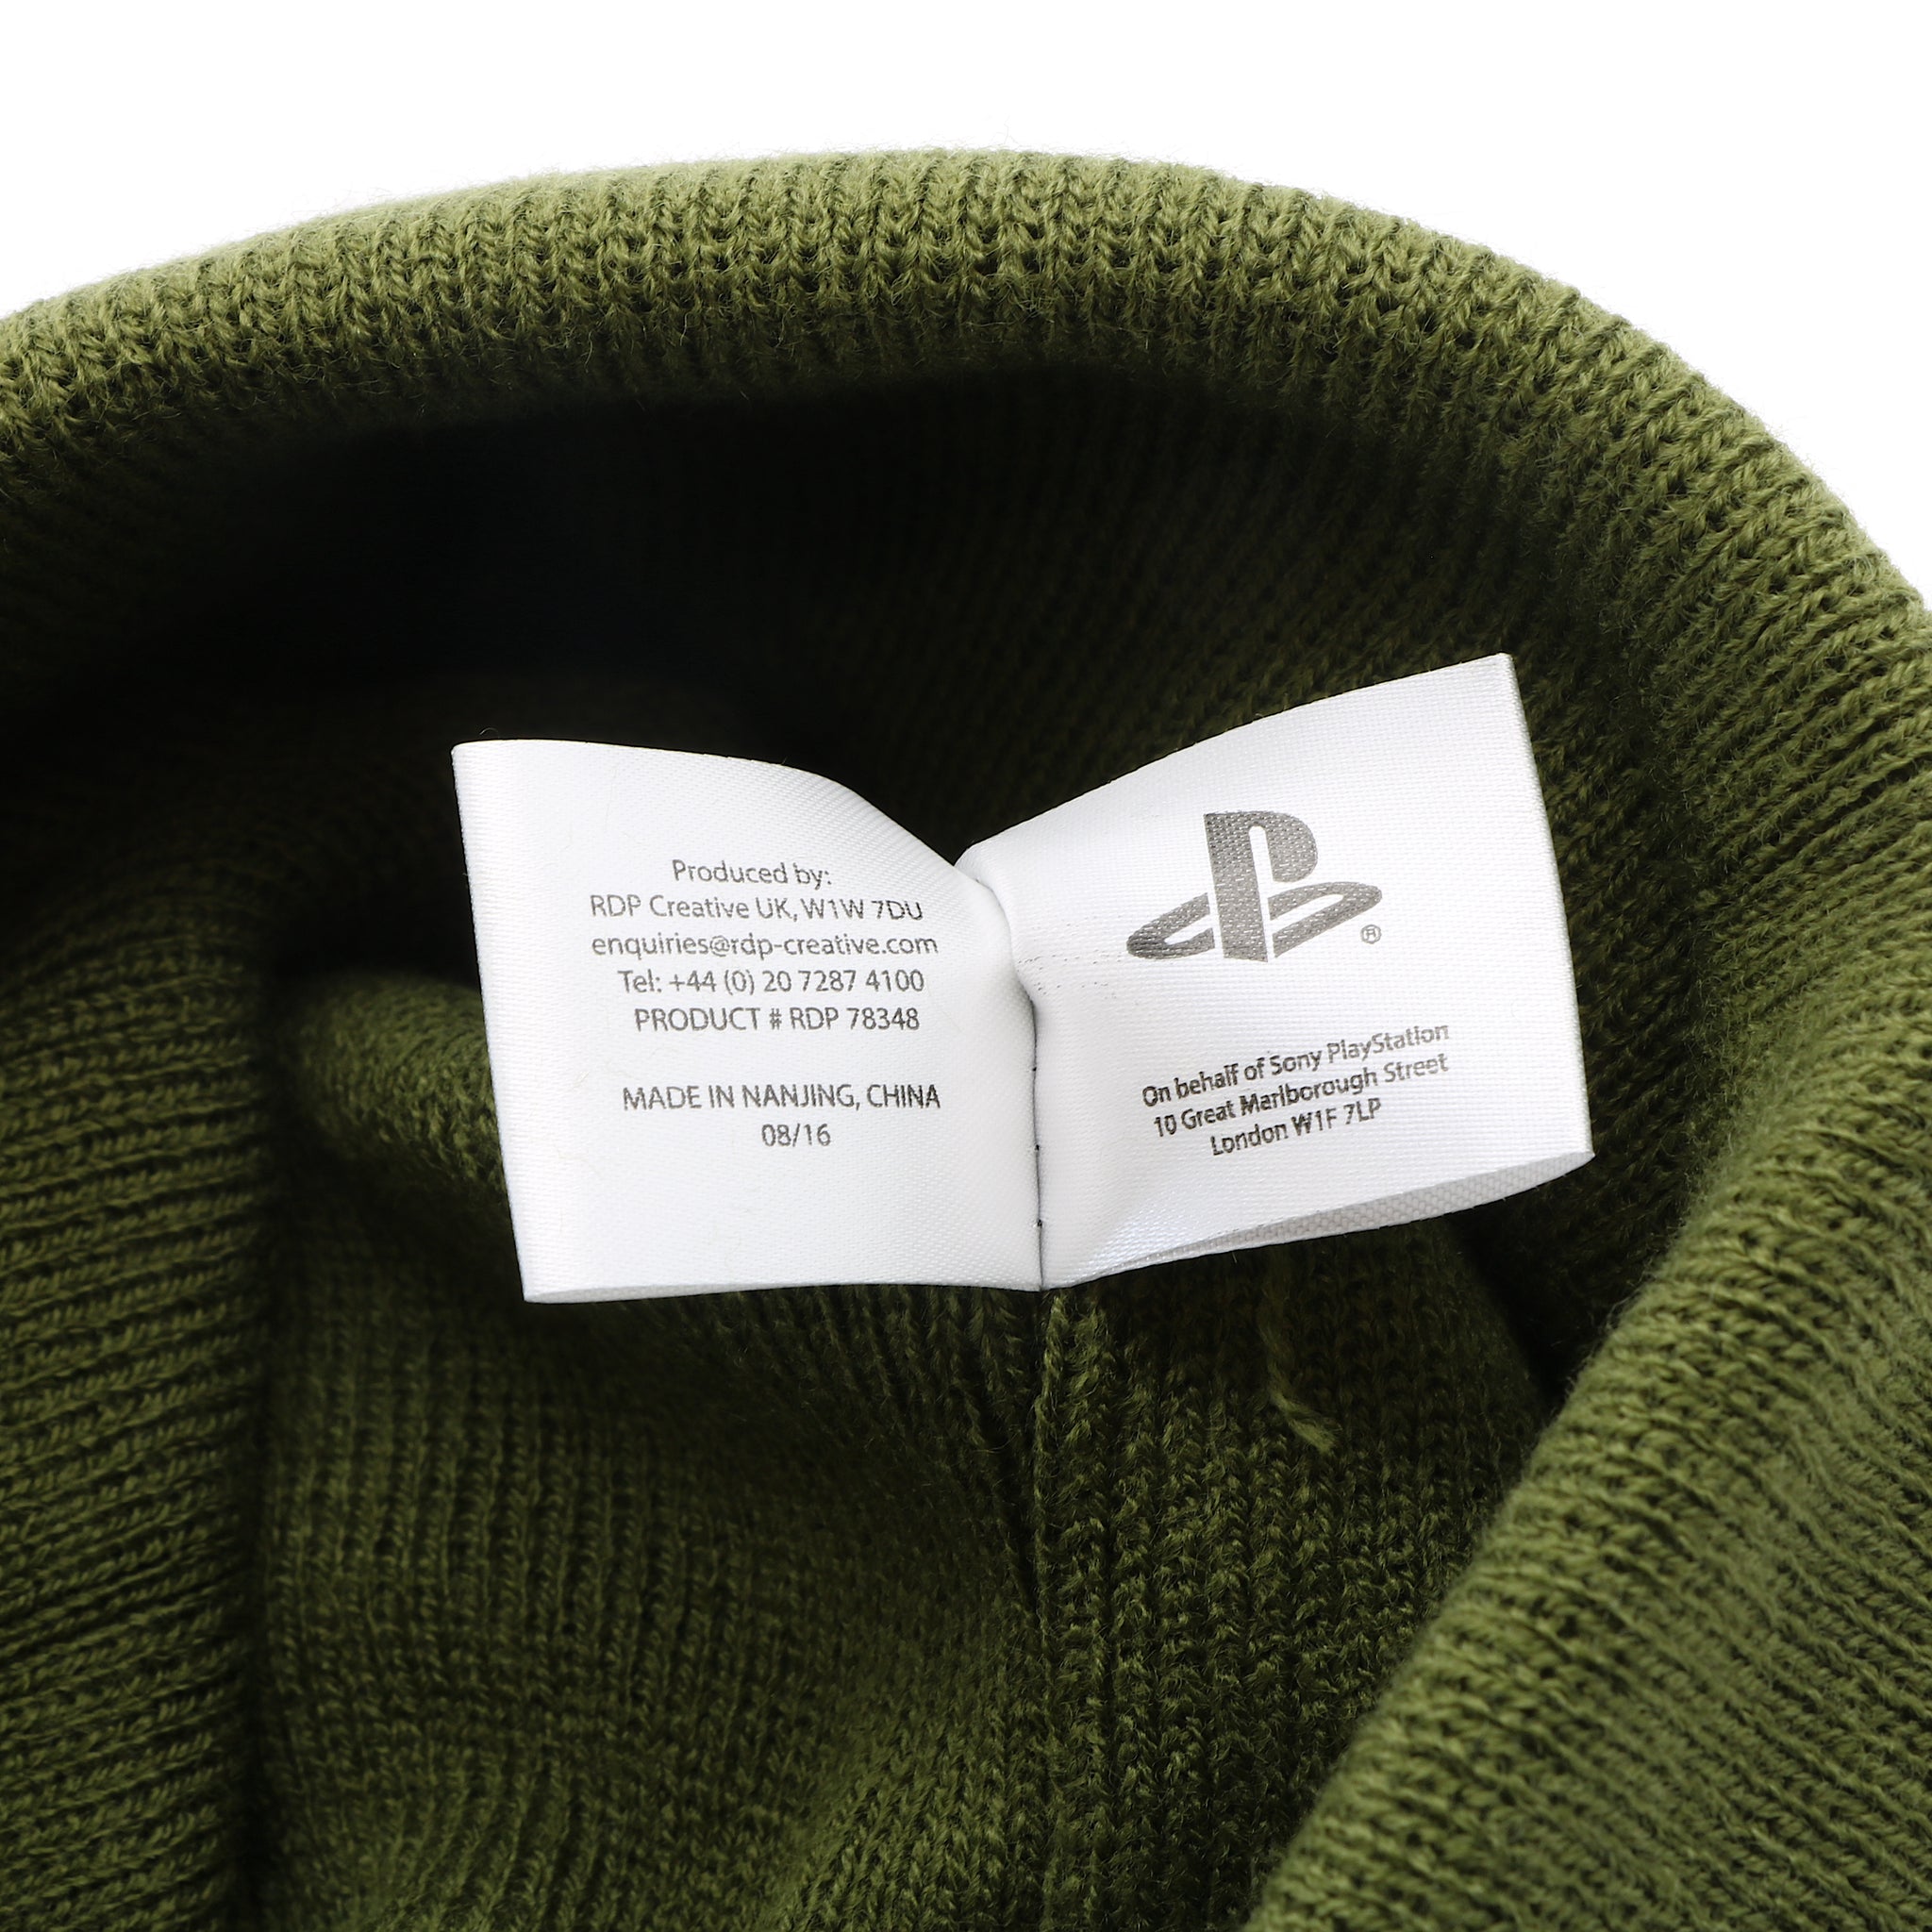 Khaki Green Beanie Hat | From The Last Guardian Official Sony PS4 Game